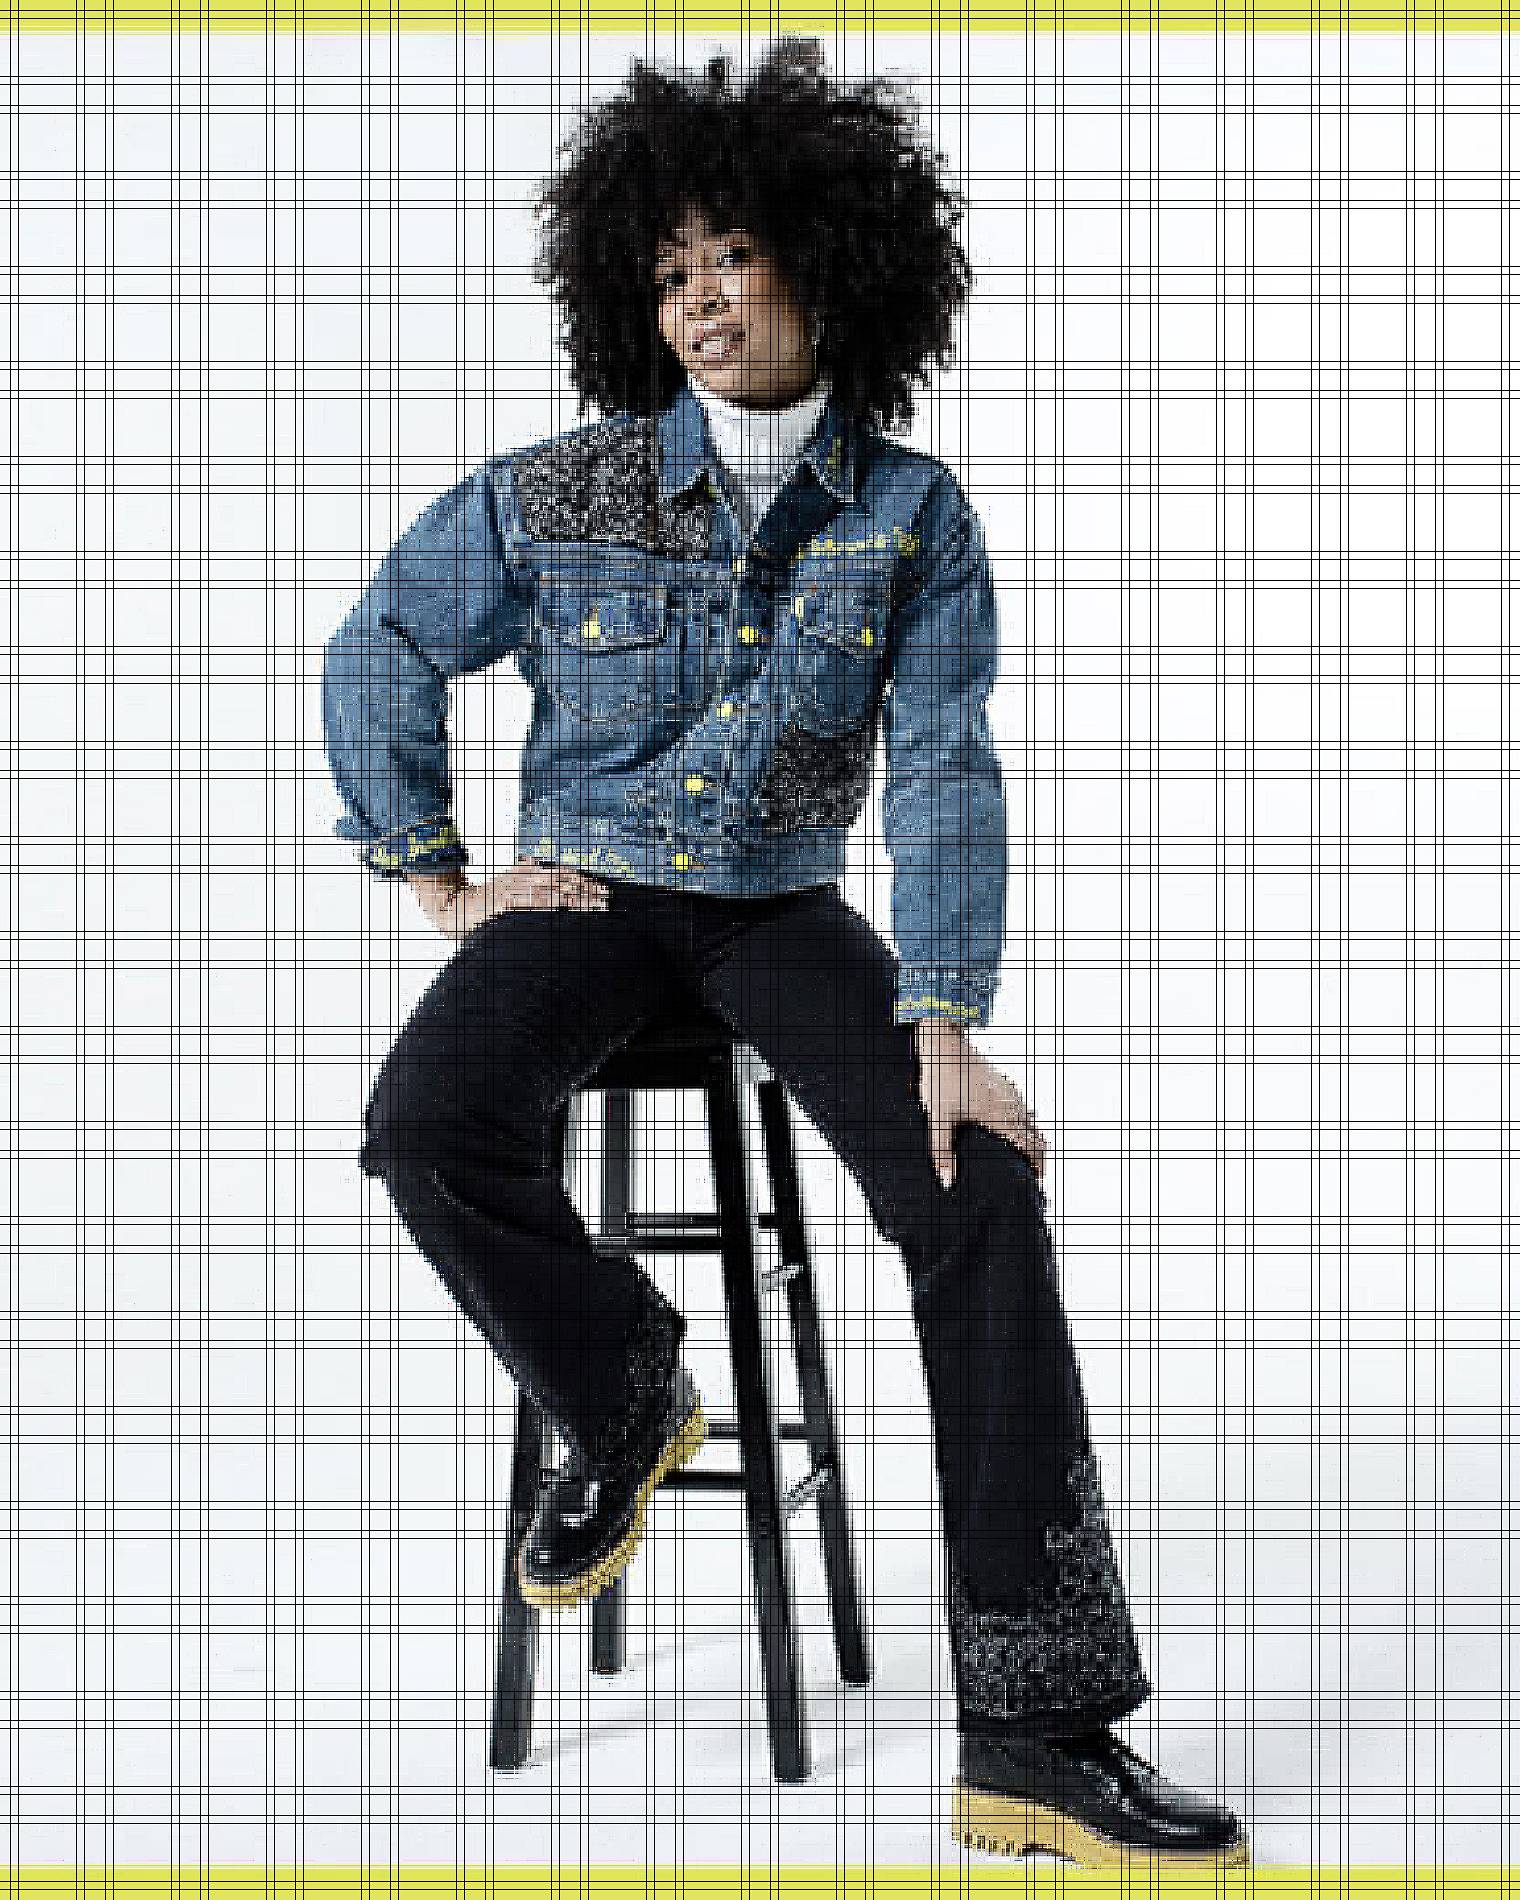 A portrait shot of Marrisa Wilson and two close up shots showcasing the custom jean jacket and pants designed in collaboration with Marrisa Wilson